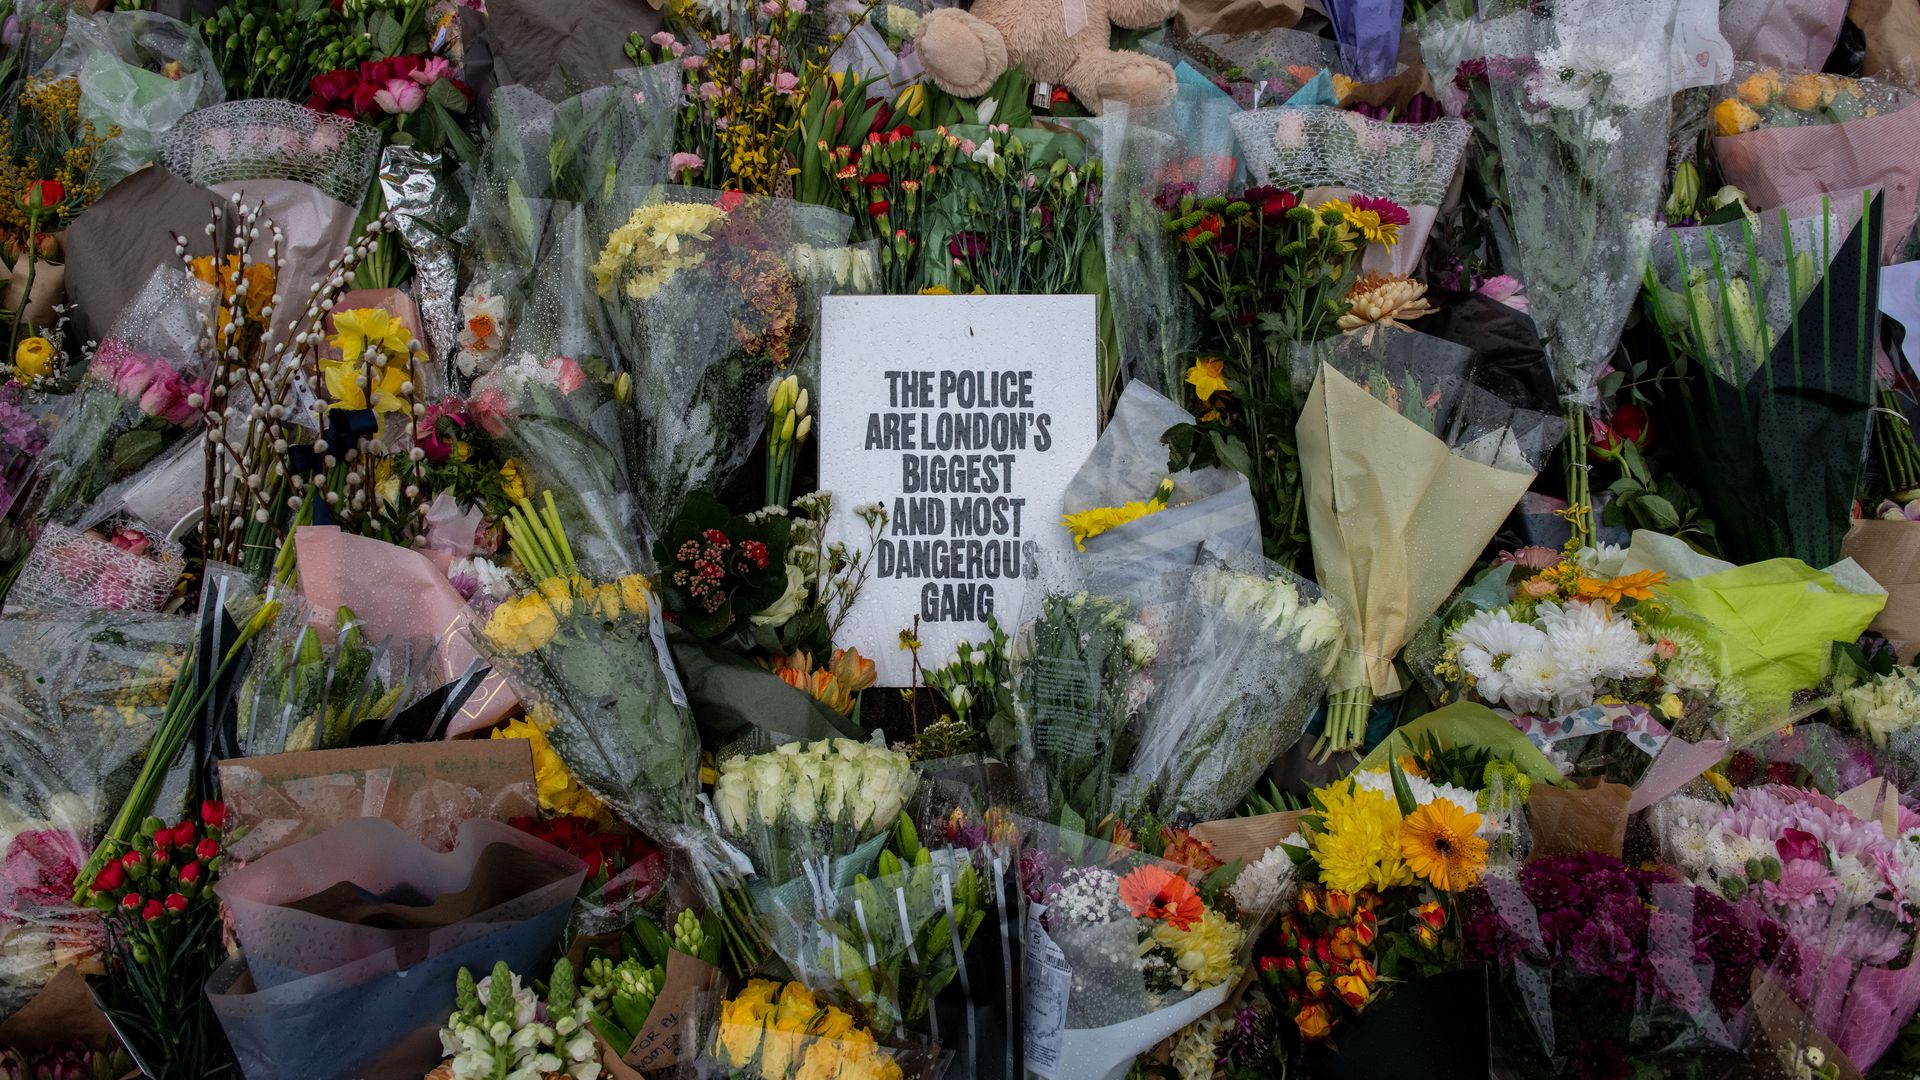 Picture of a floral tribute with flowers surrounding a sign that says "the police are London's biggest and most dangerous gang"